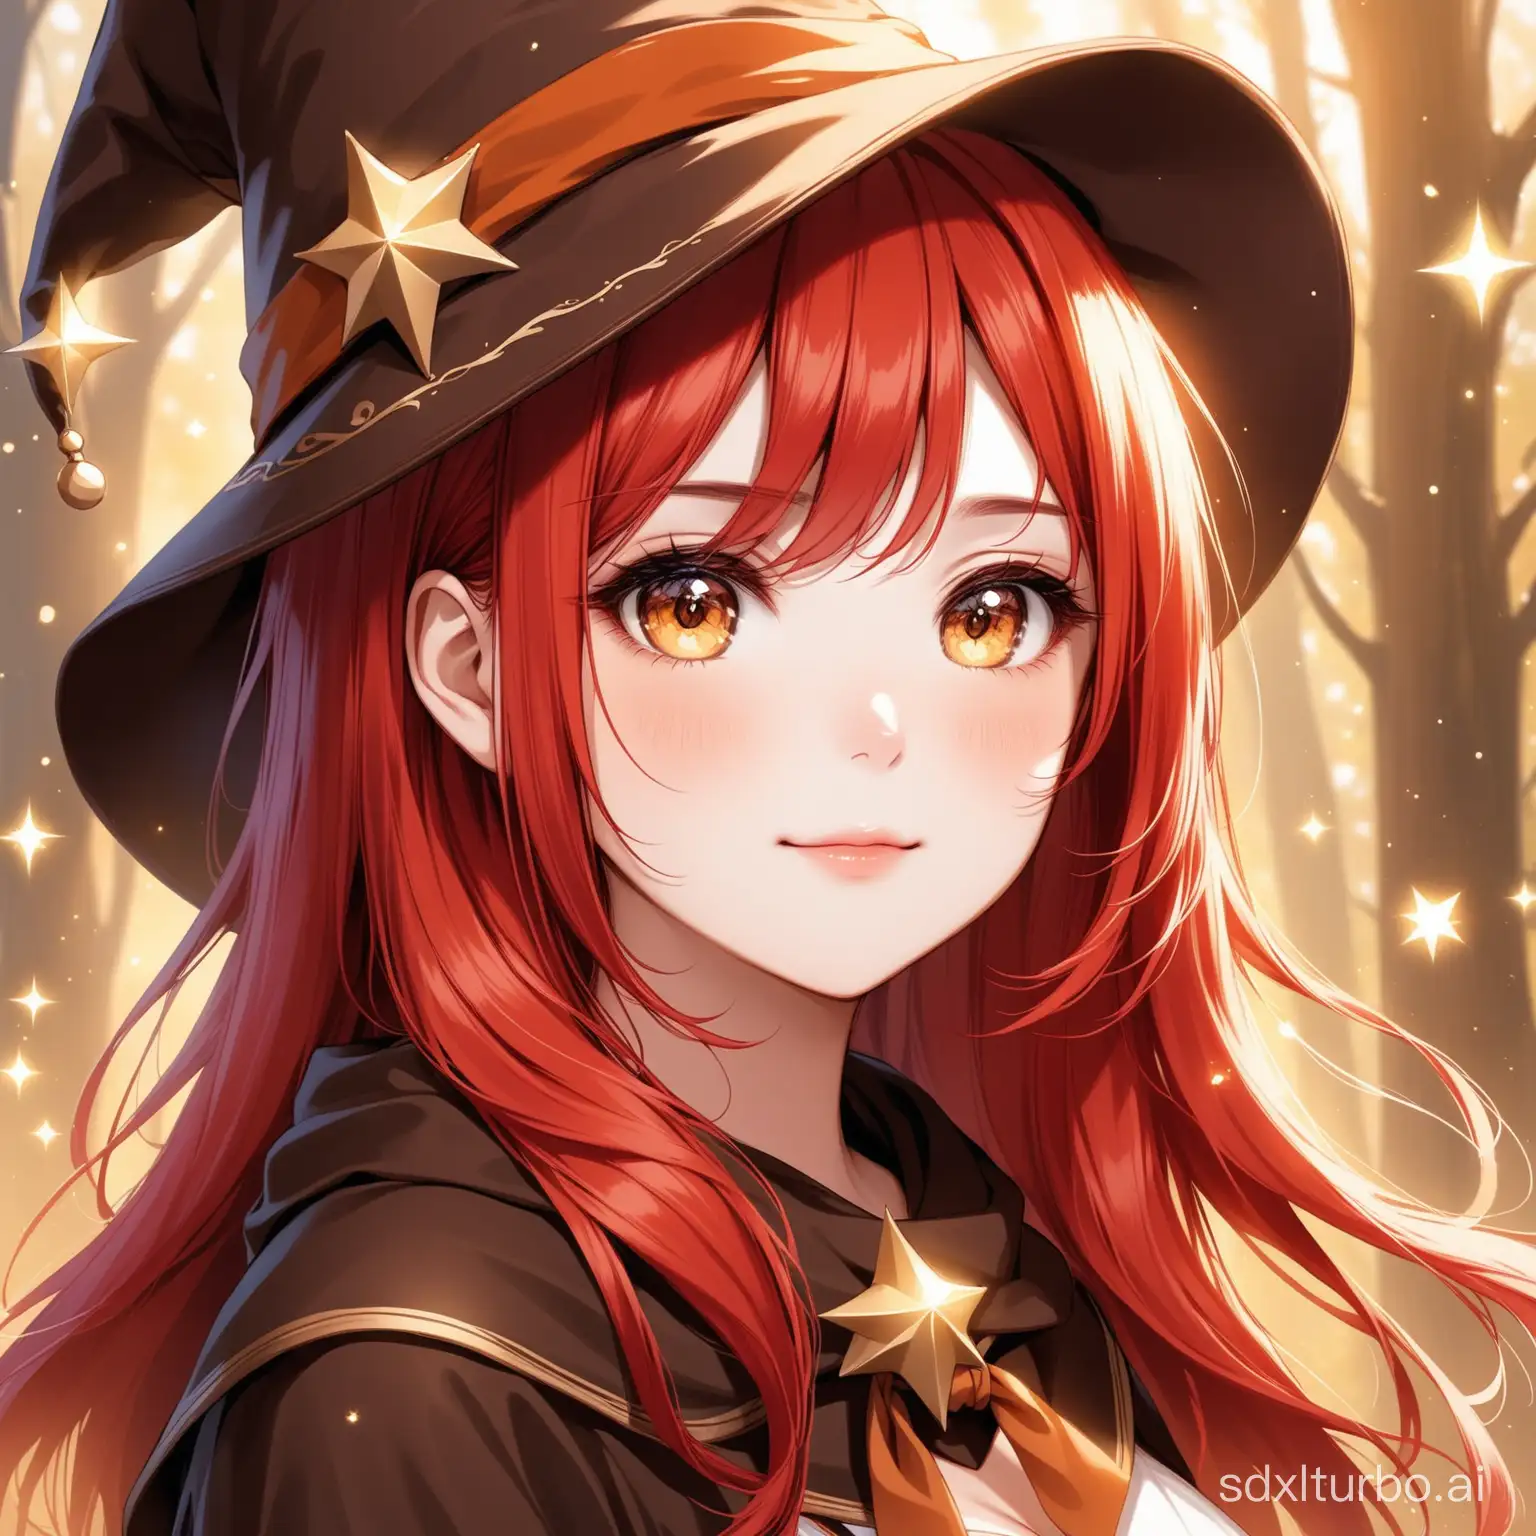 Beautiful girl with red hair wearing brown magic hat, idc